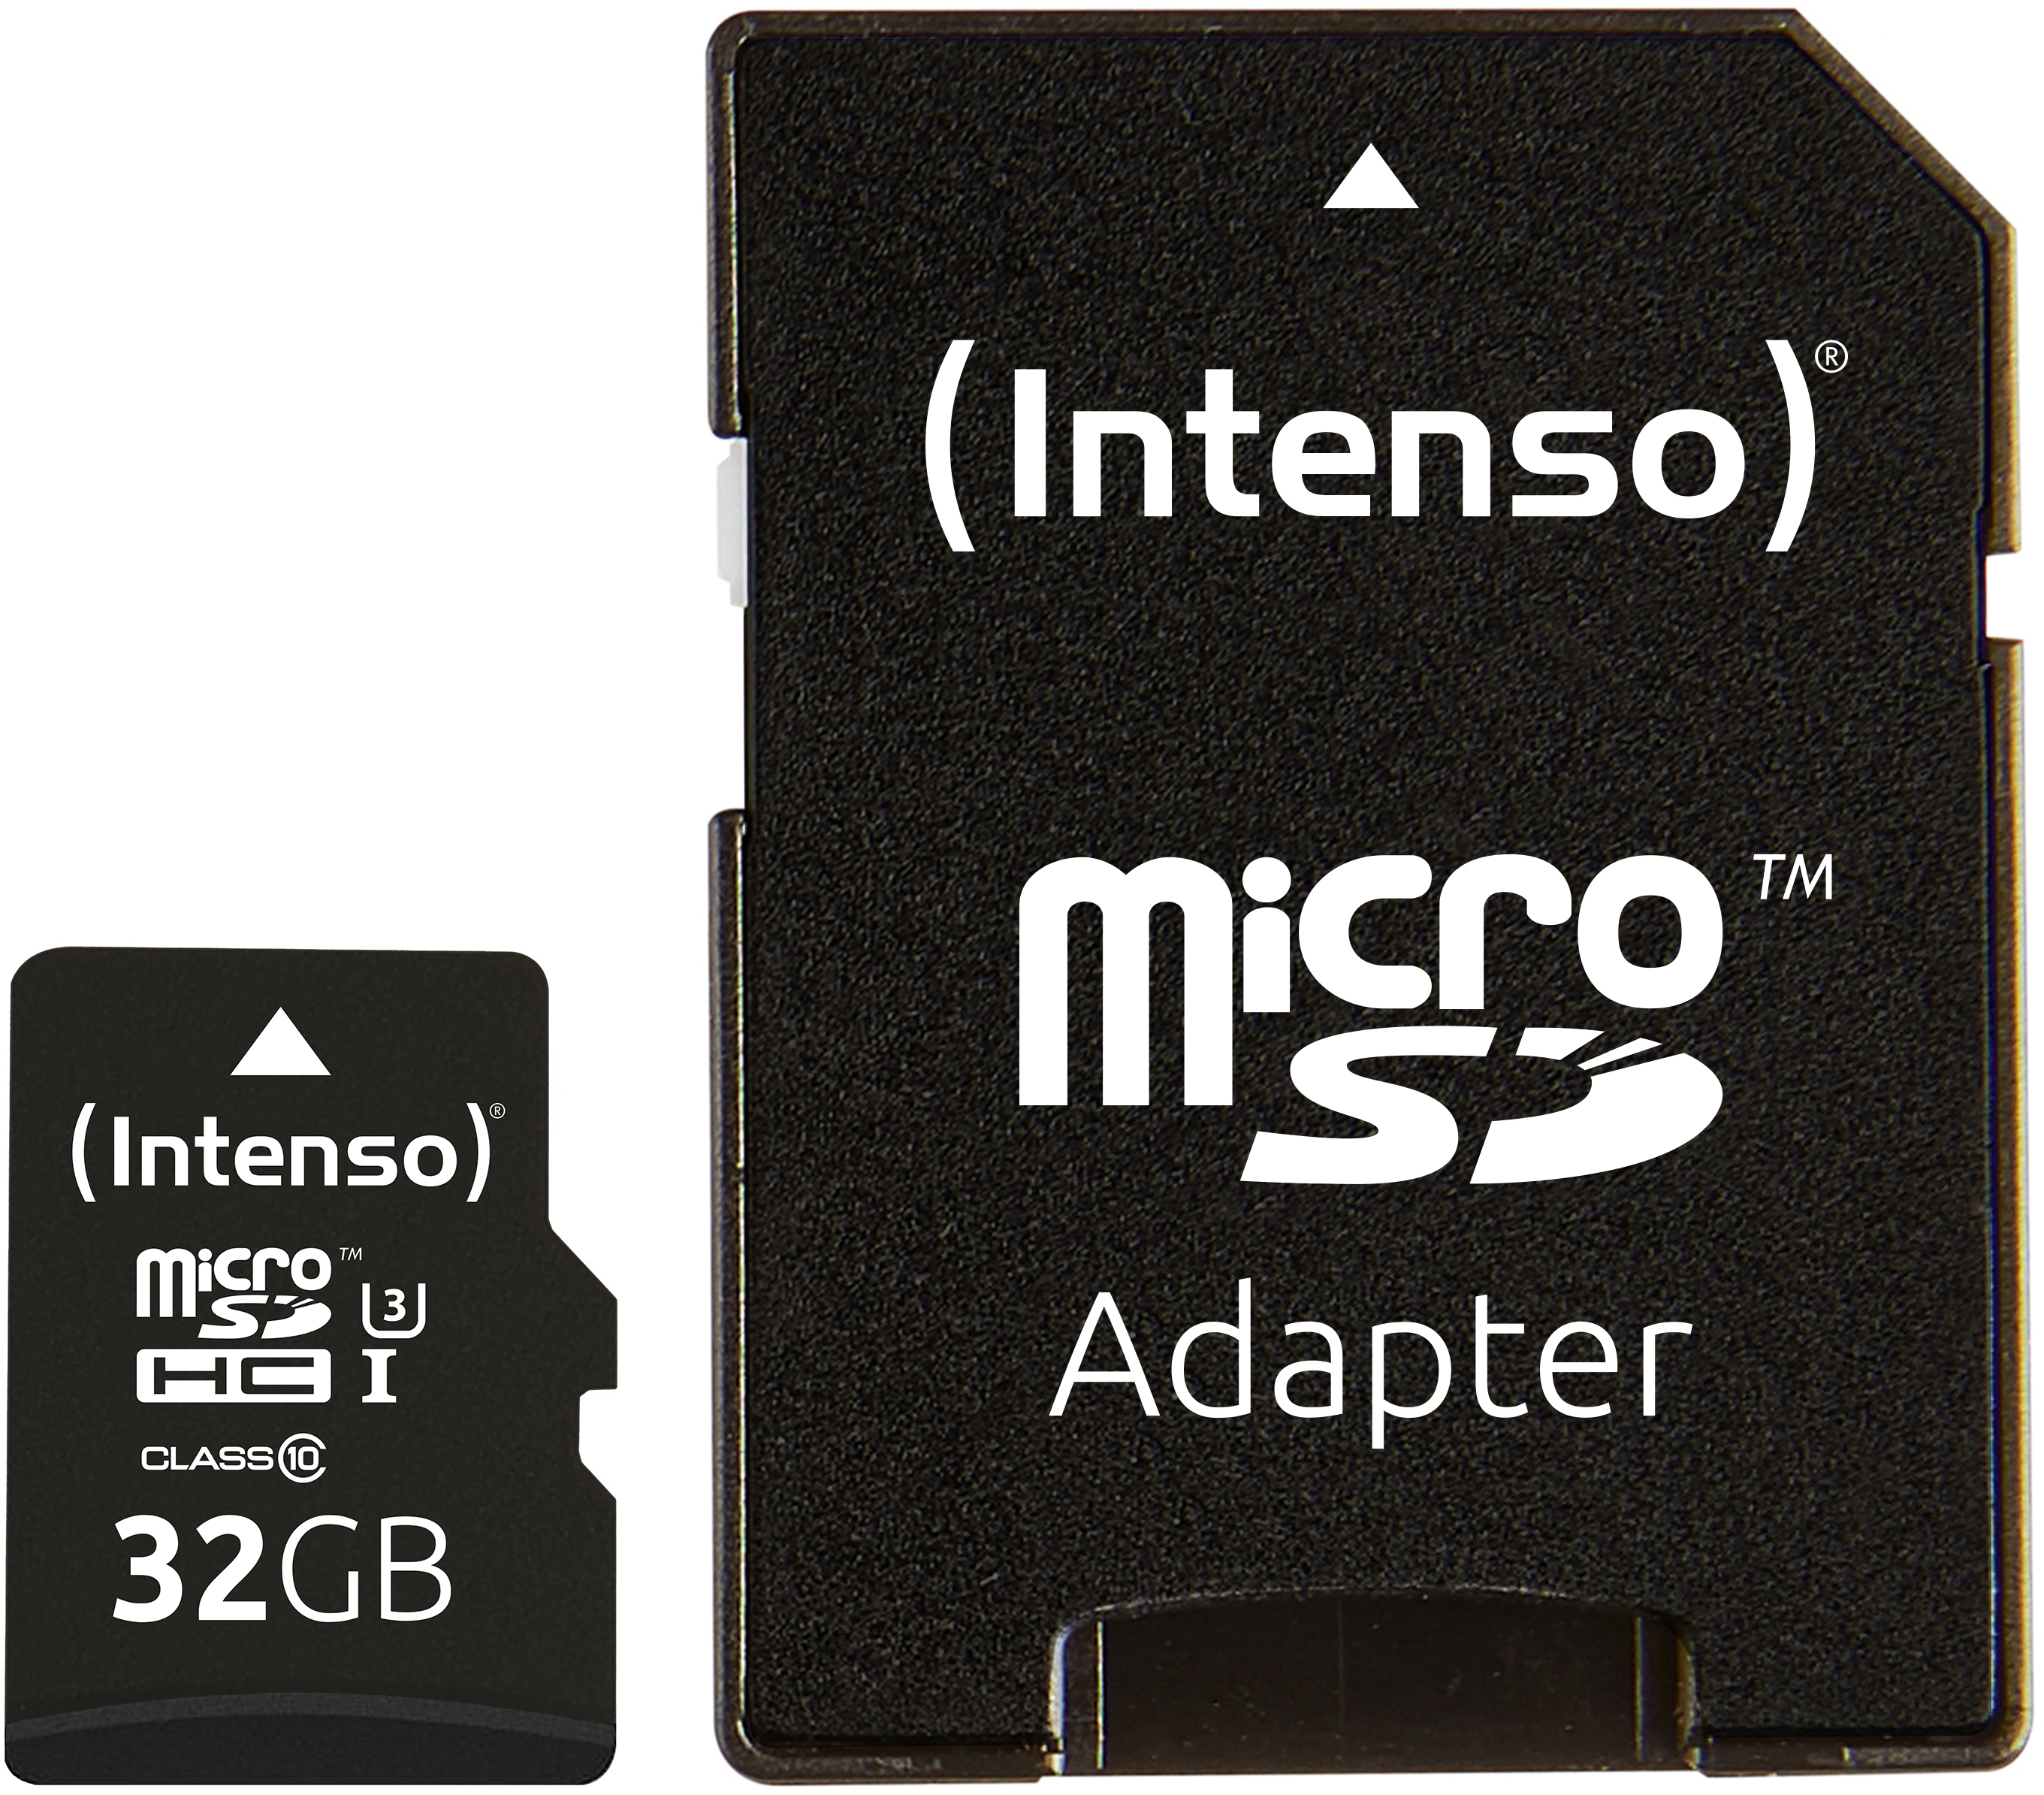 INTENSO Micro SDHC Card PRO 32GB 3433480 with adapter, UHS-I with adapter, UHS-I